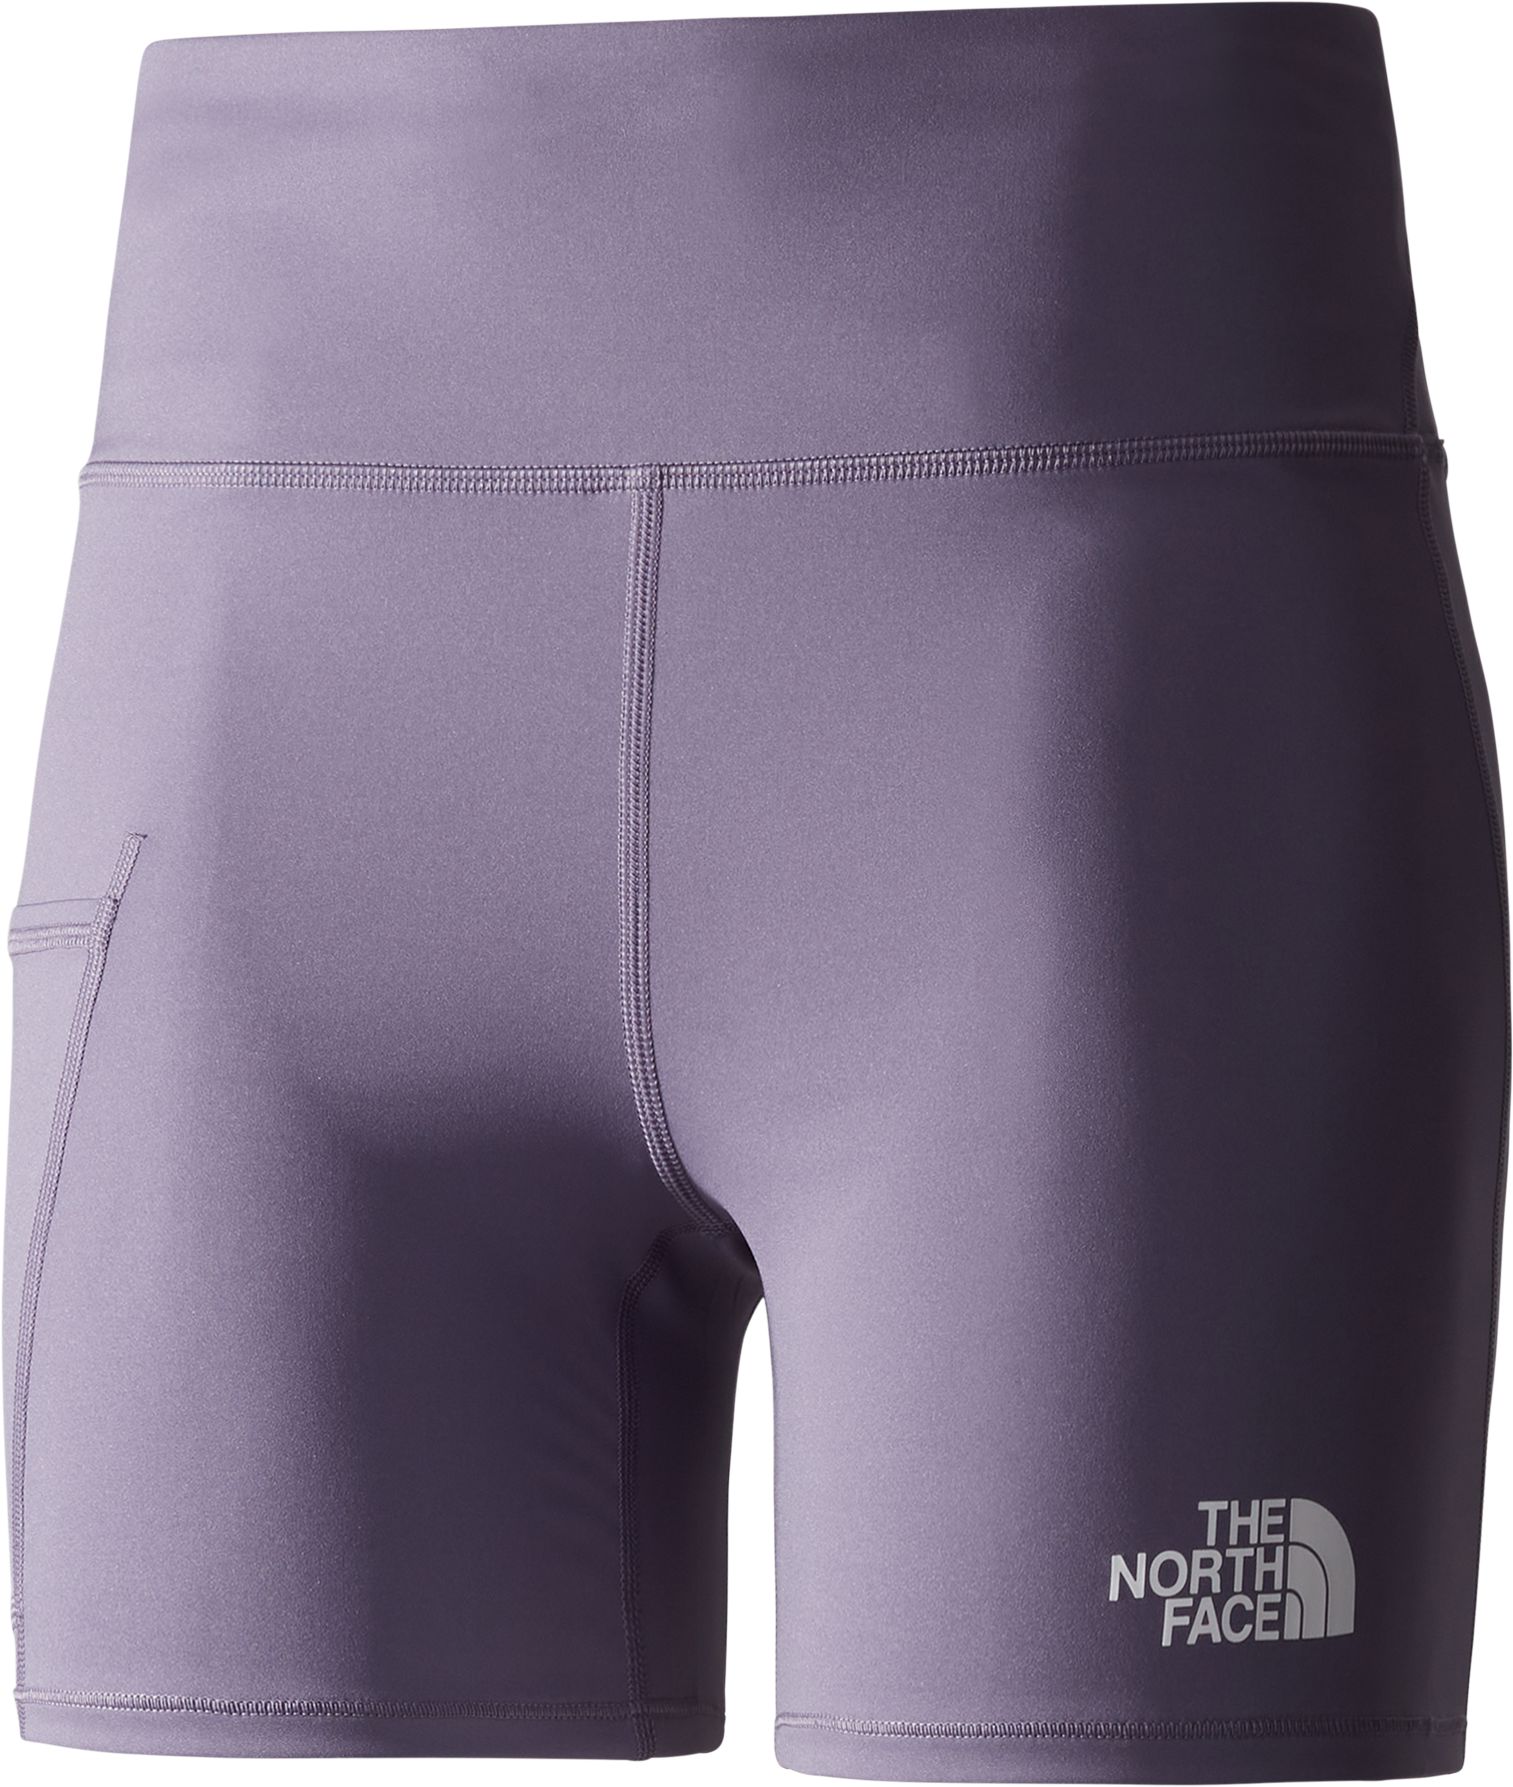 THE NORTH FACE, W MOVMYNT TIGHT SHORT